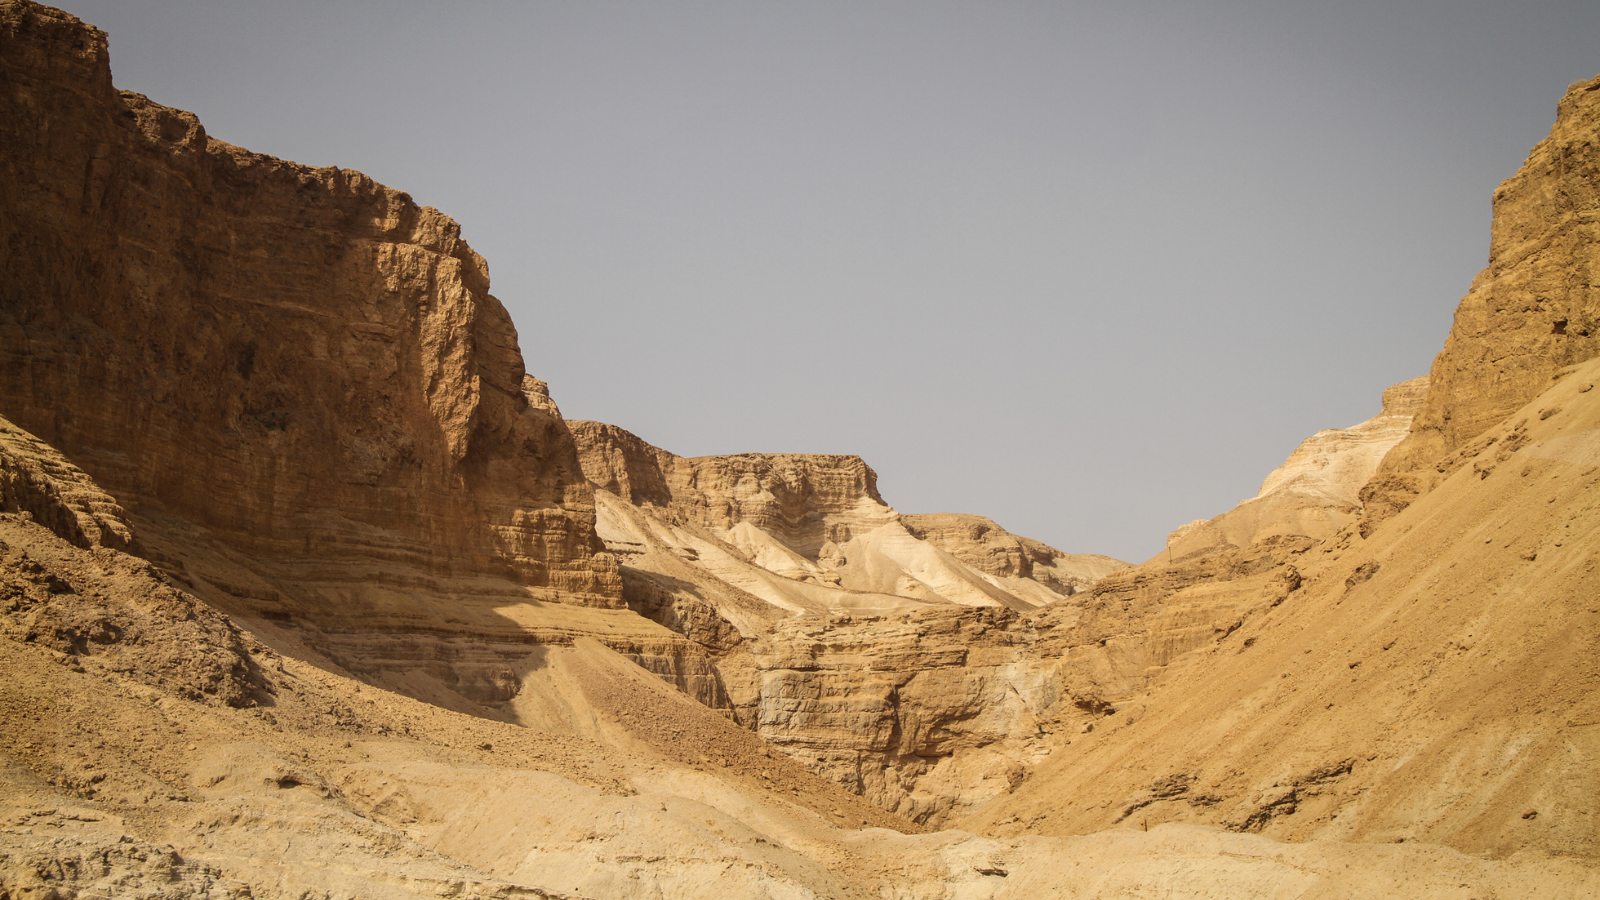 A view of the rocky cliffs of Masada, Israel.